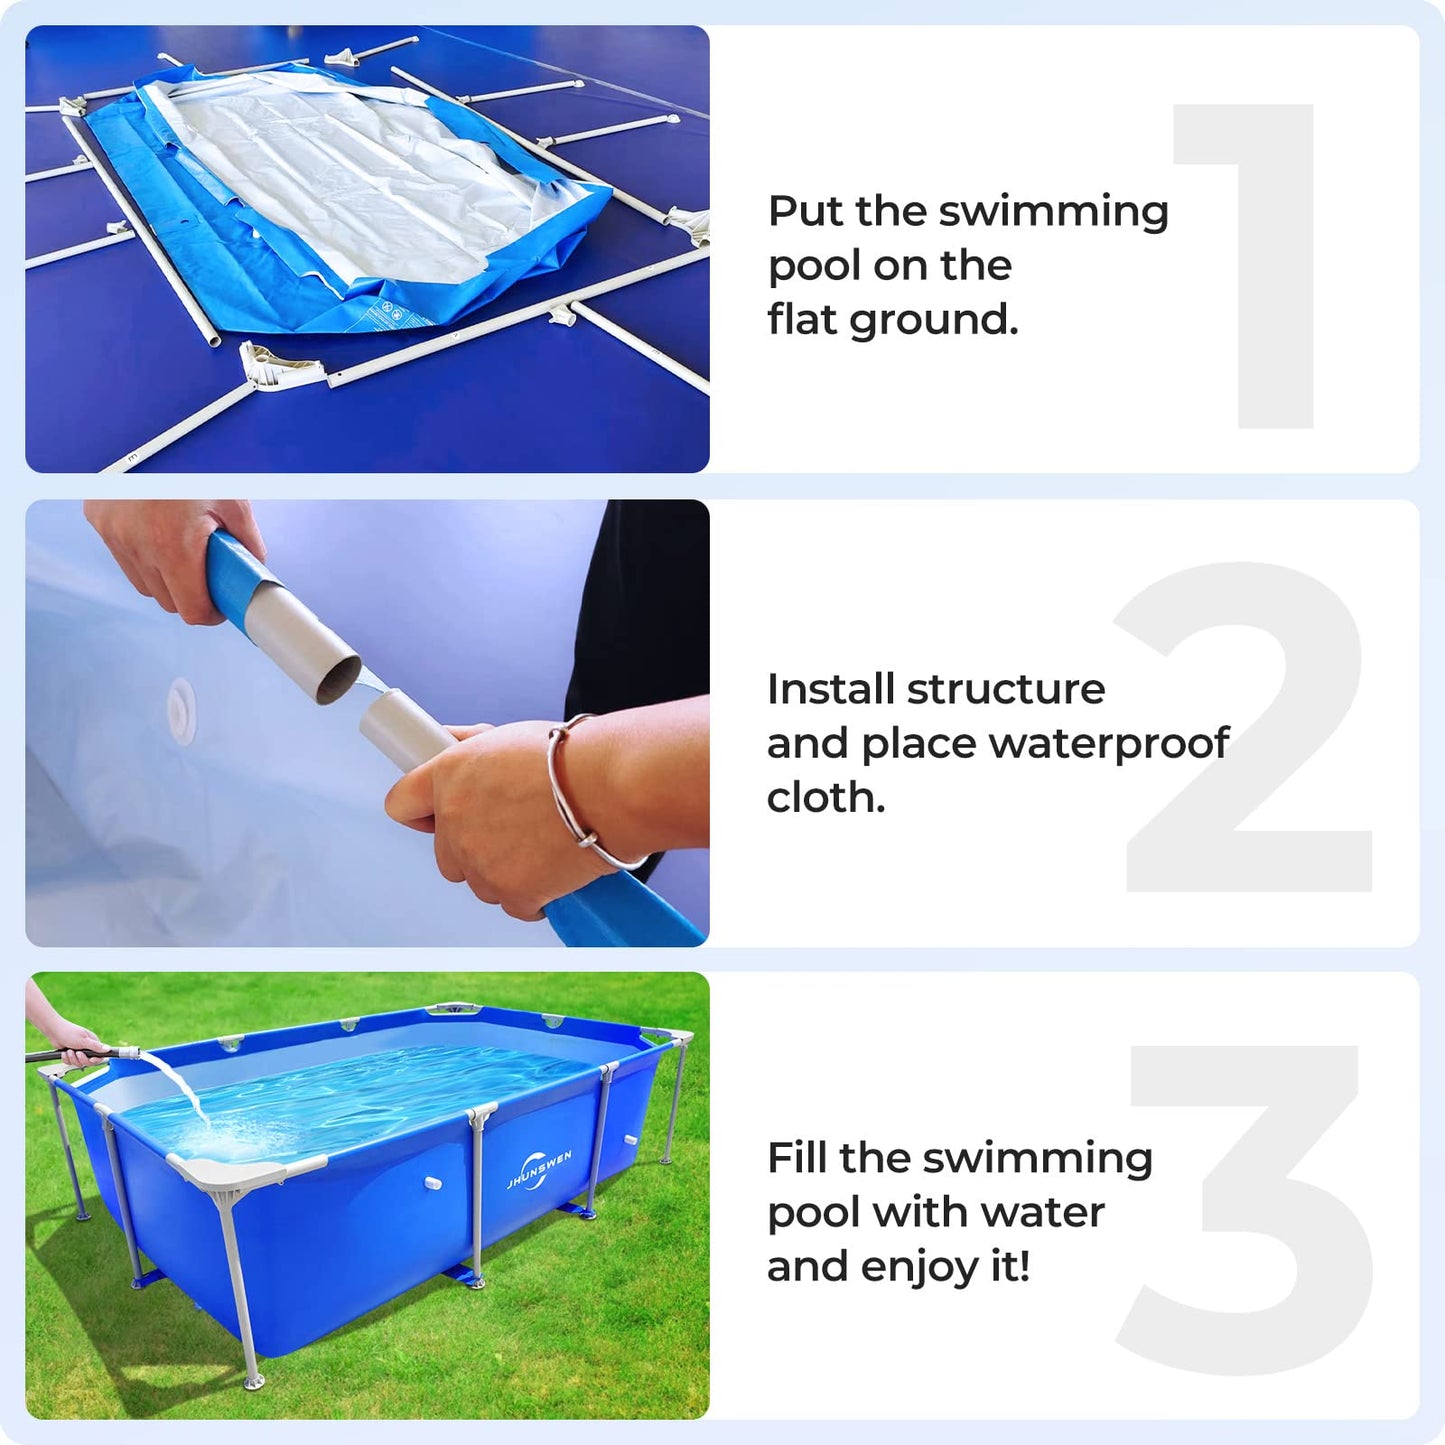 Above Ground Swimming Pool, Jhunswen 8.3ft x 5ft x 26in Outdoor Rectangular Steel Frame Pool for Adults Family, Grande Splash Square Pool for Kids, Easy Setup Pool with Repair Kit (No Filter Pump) 8ft